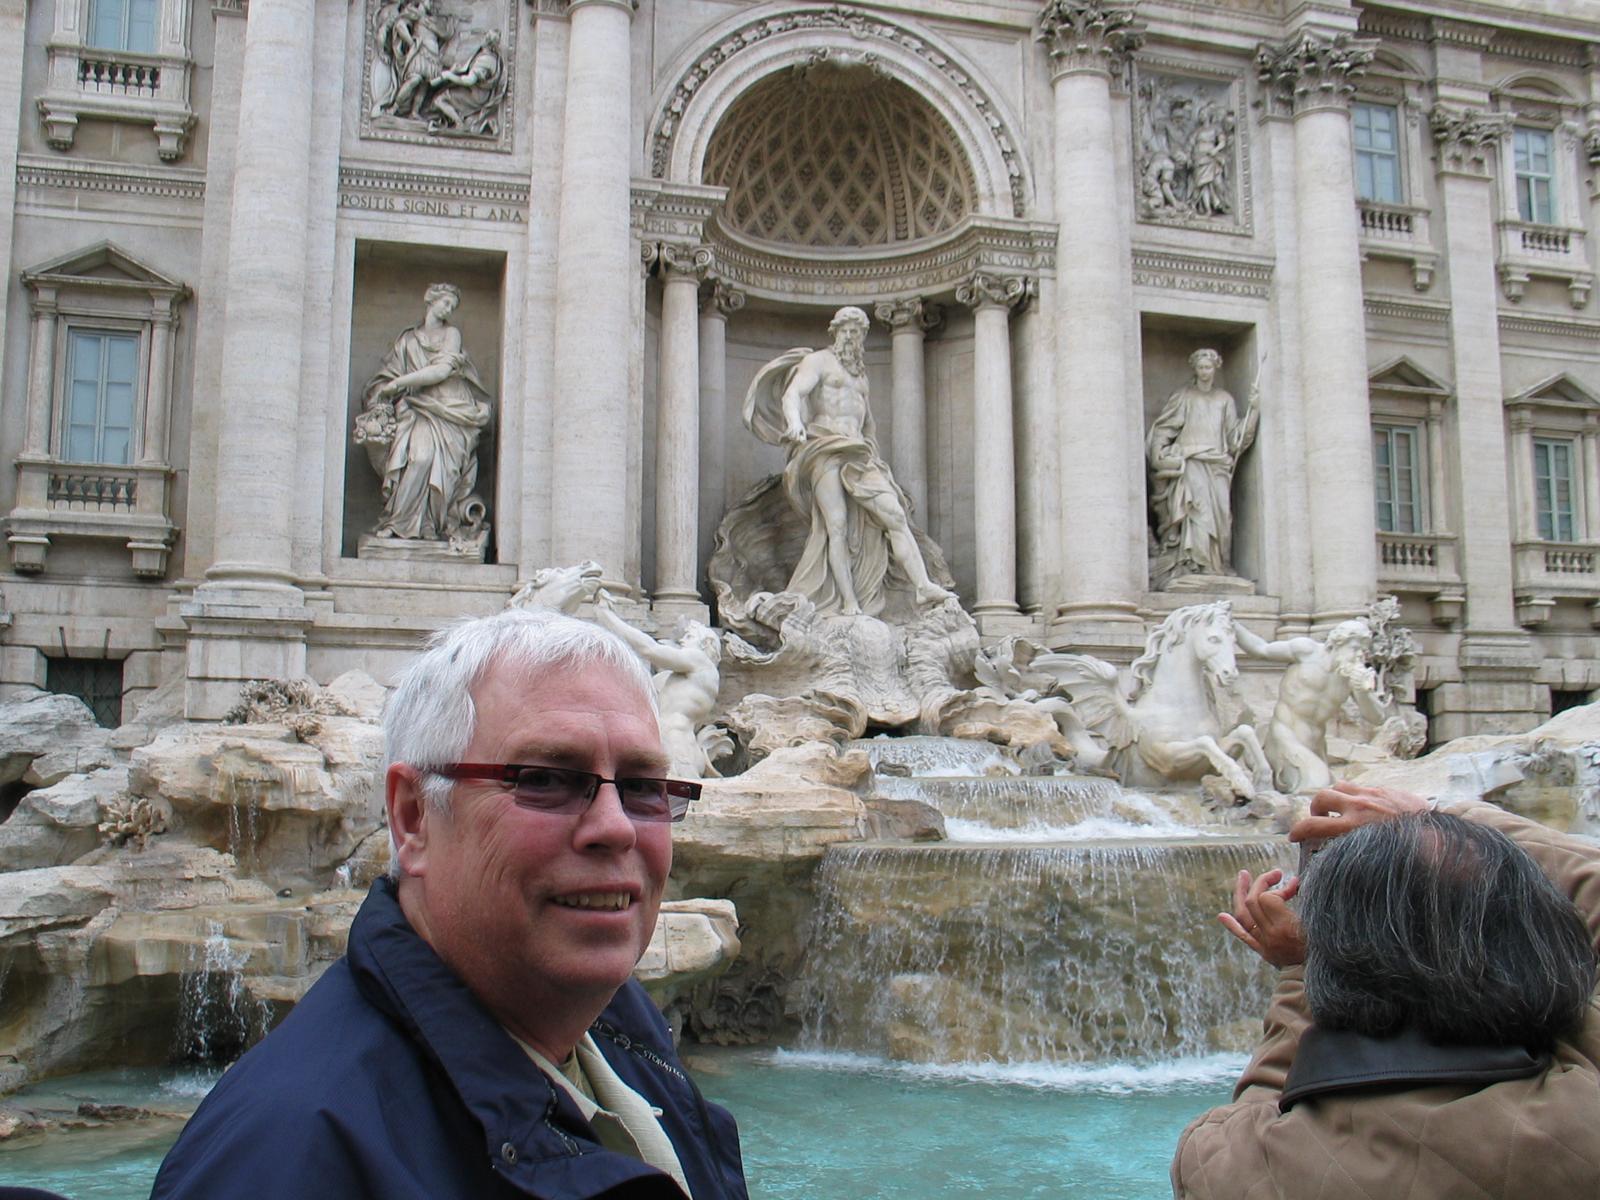 Dad at the Trevi Fountain